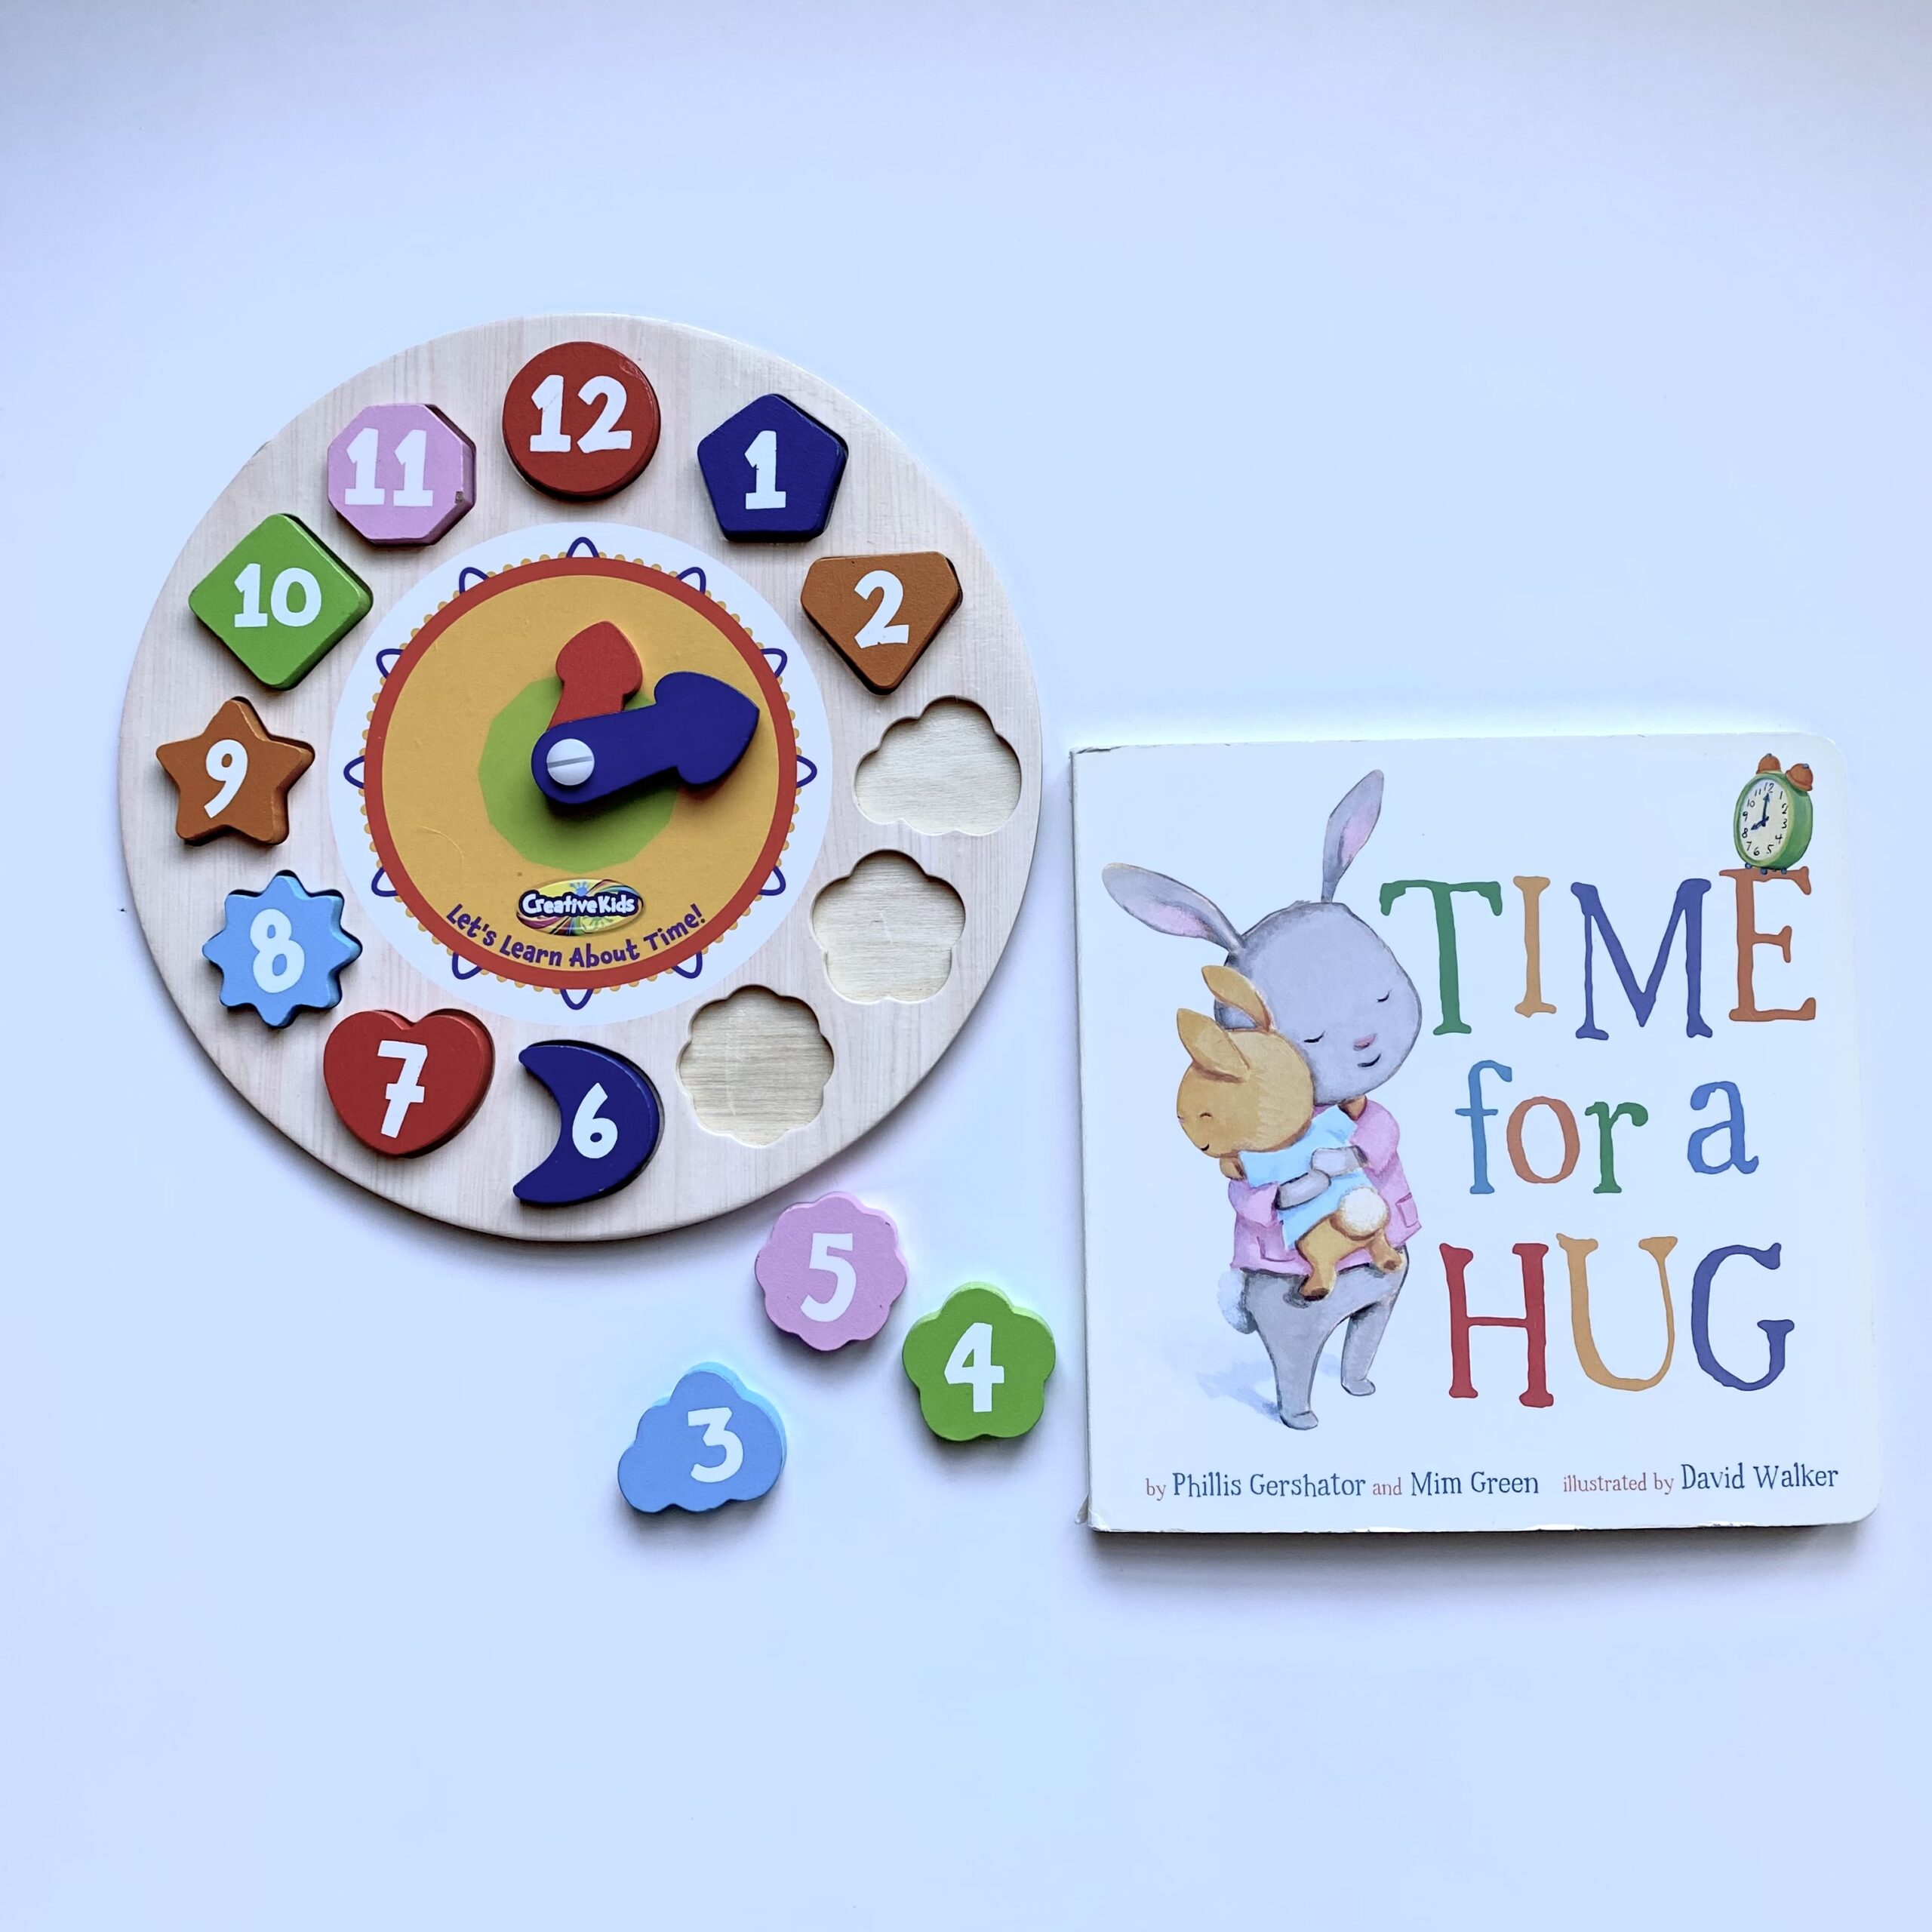 Time for a hug, toy clock and book about bunnies telling time.